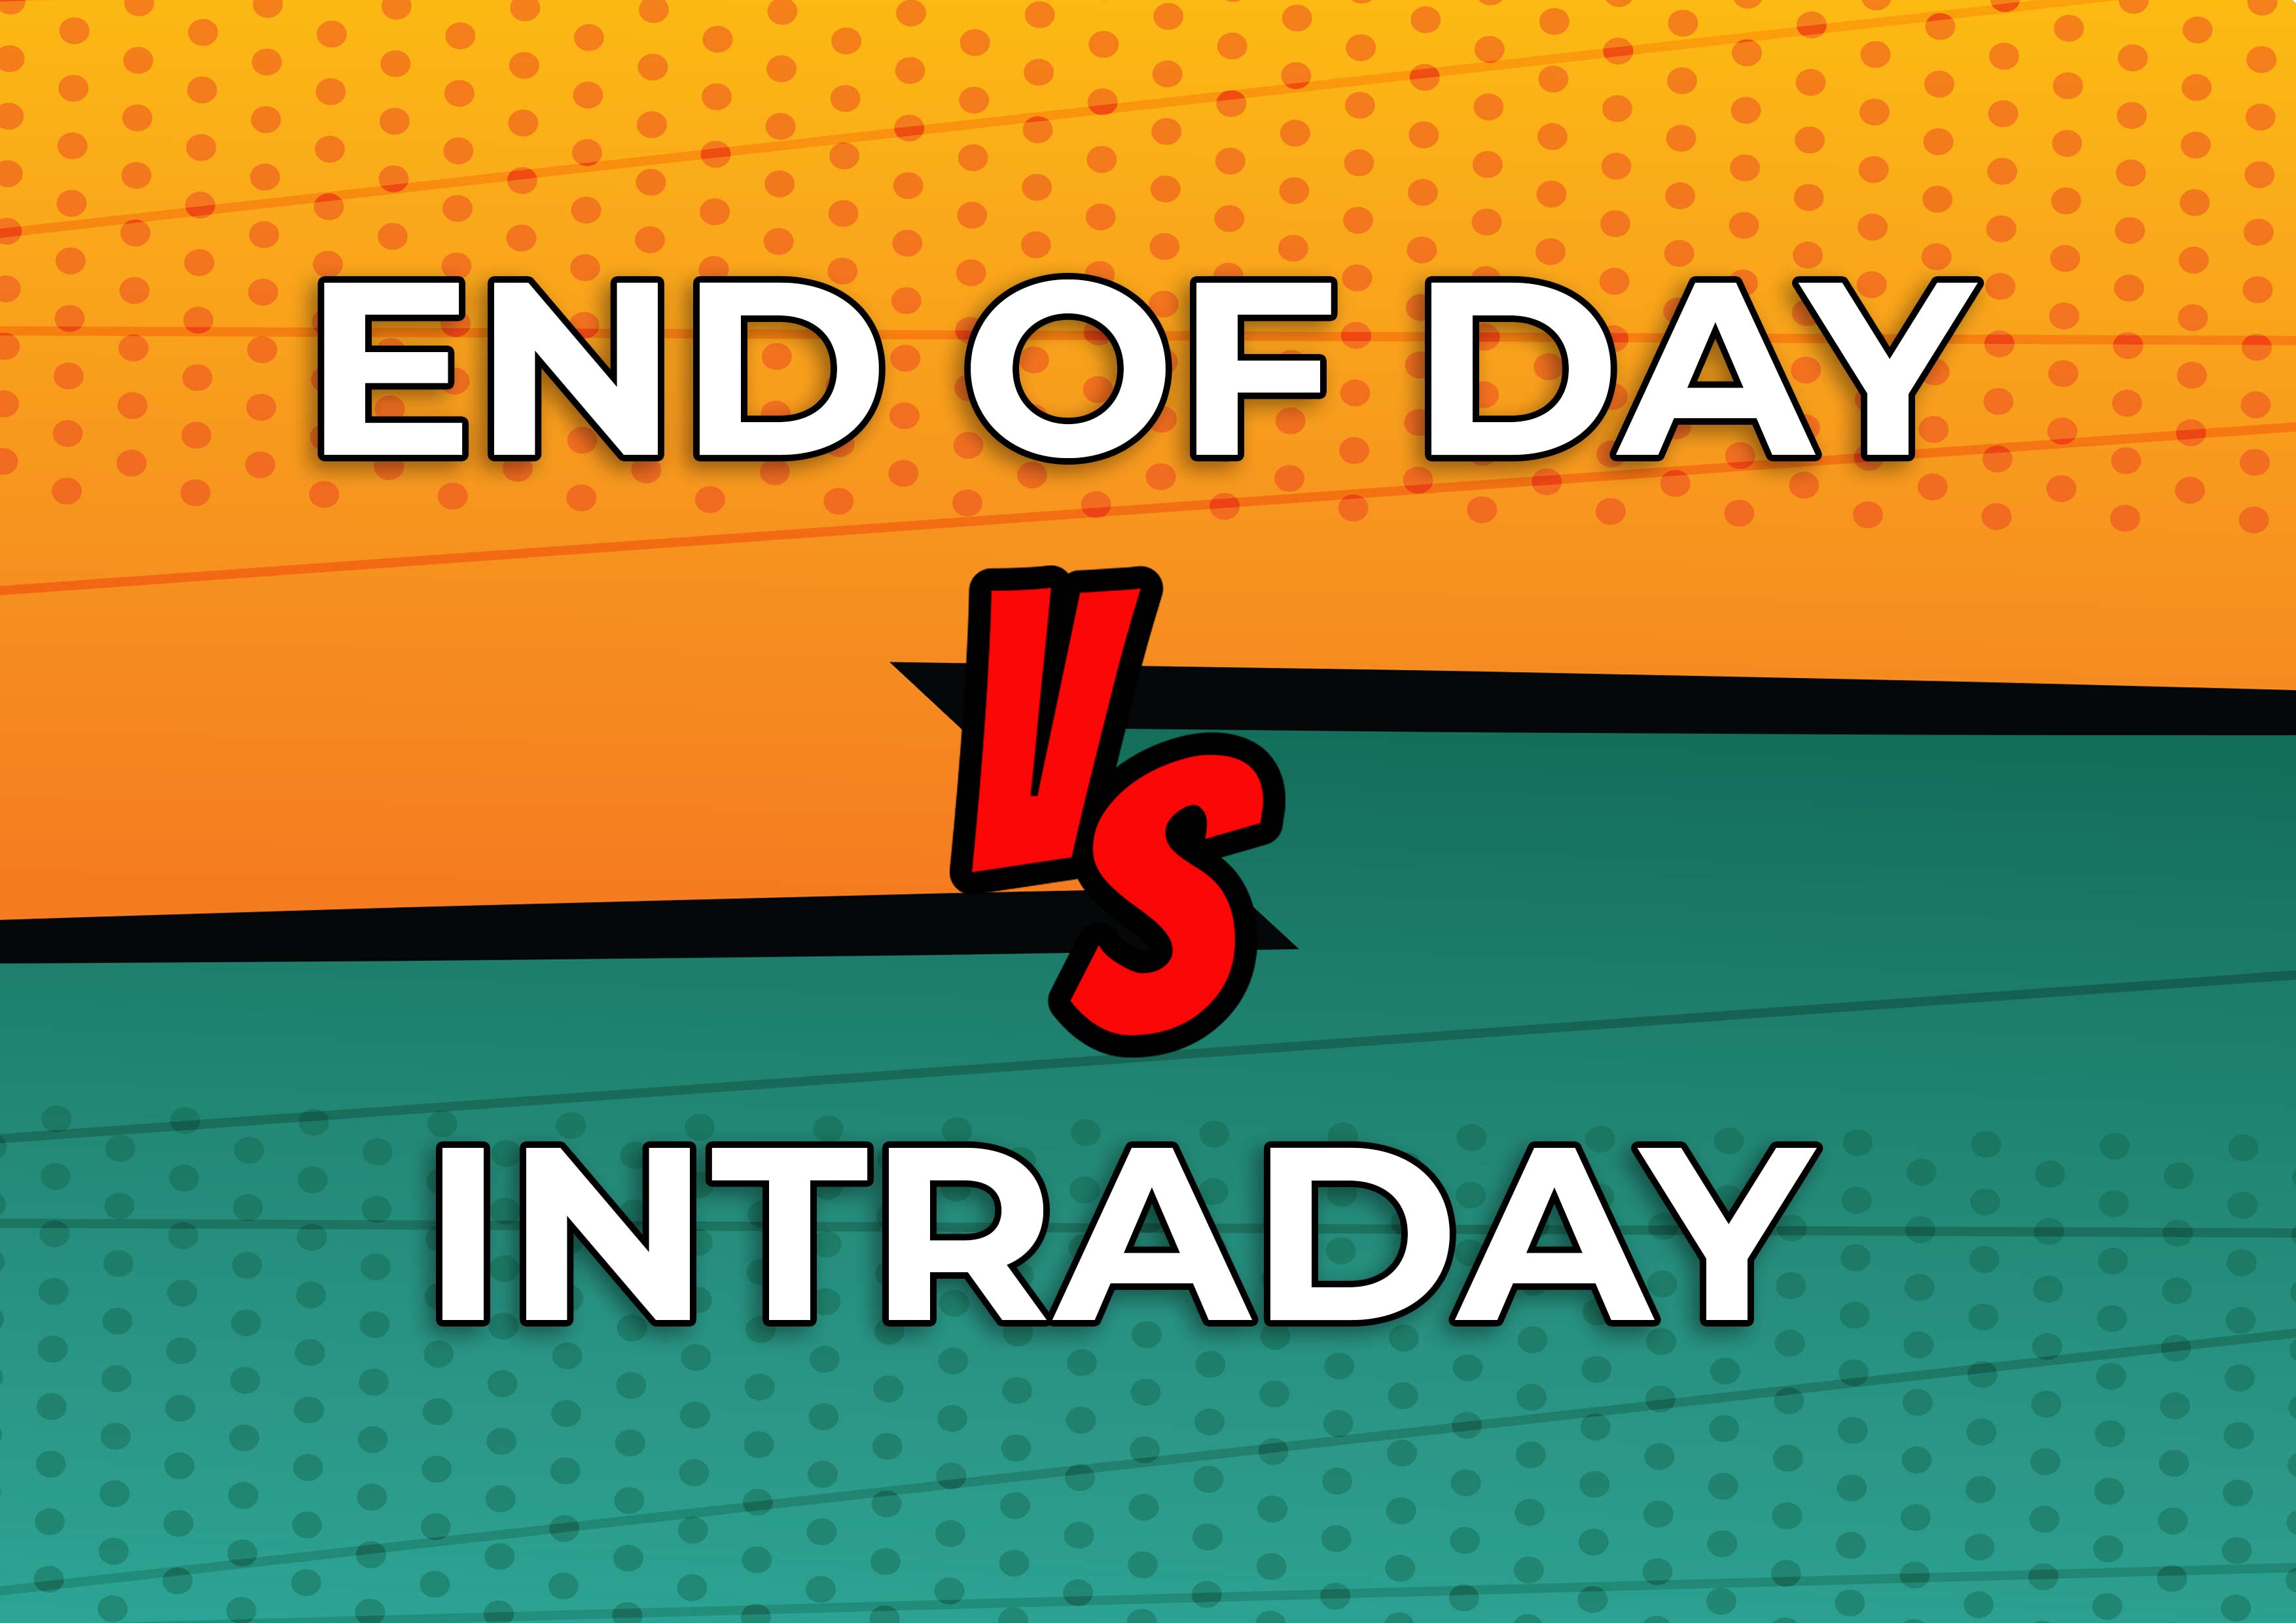 Forex intraday vs end of day